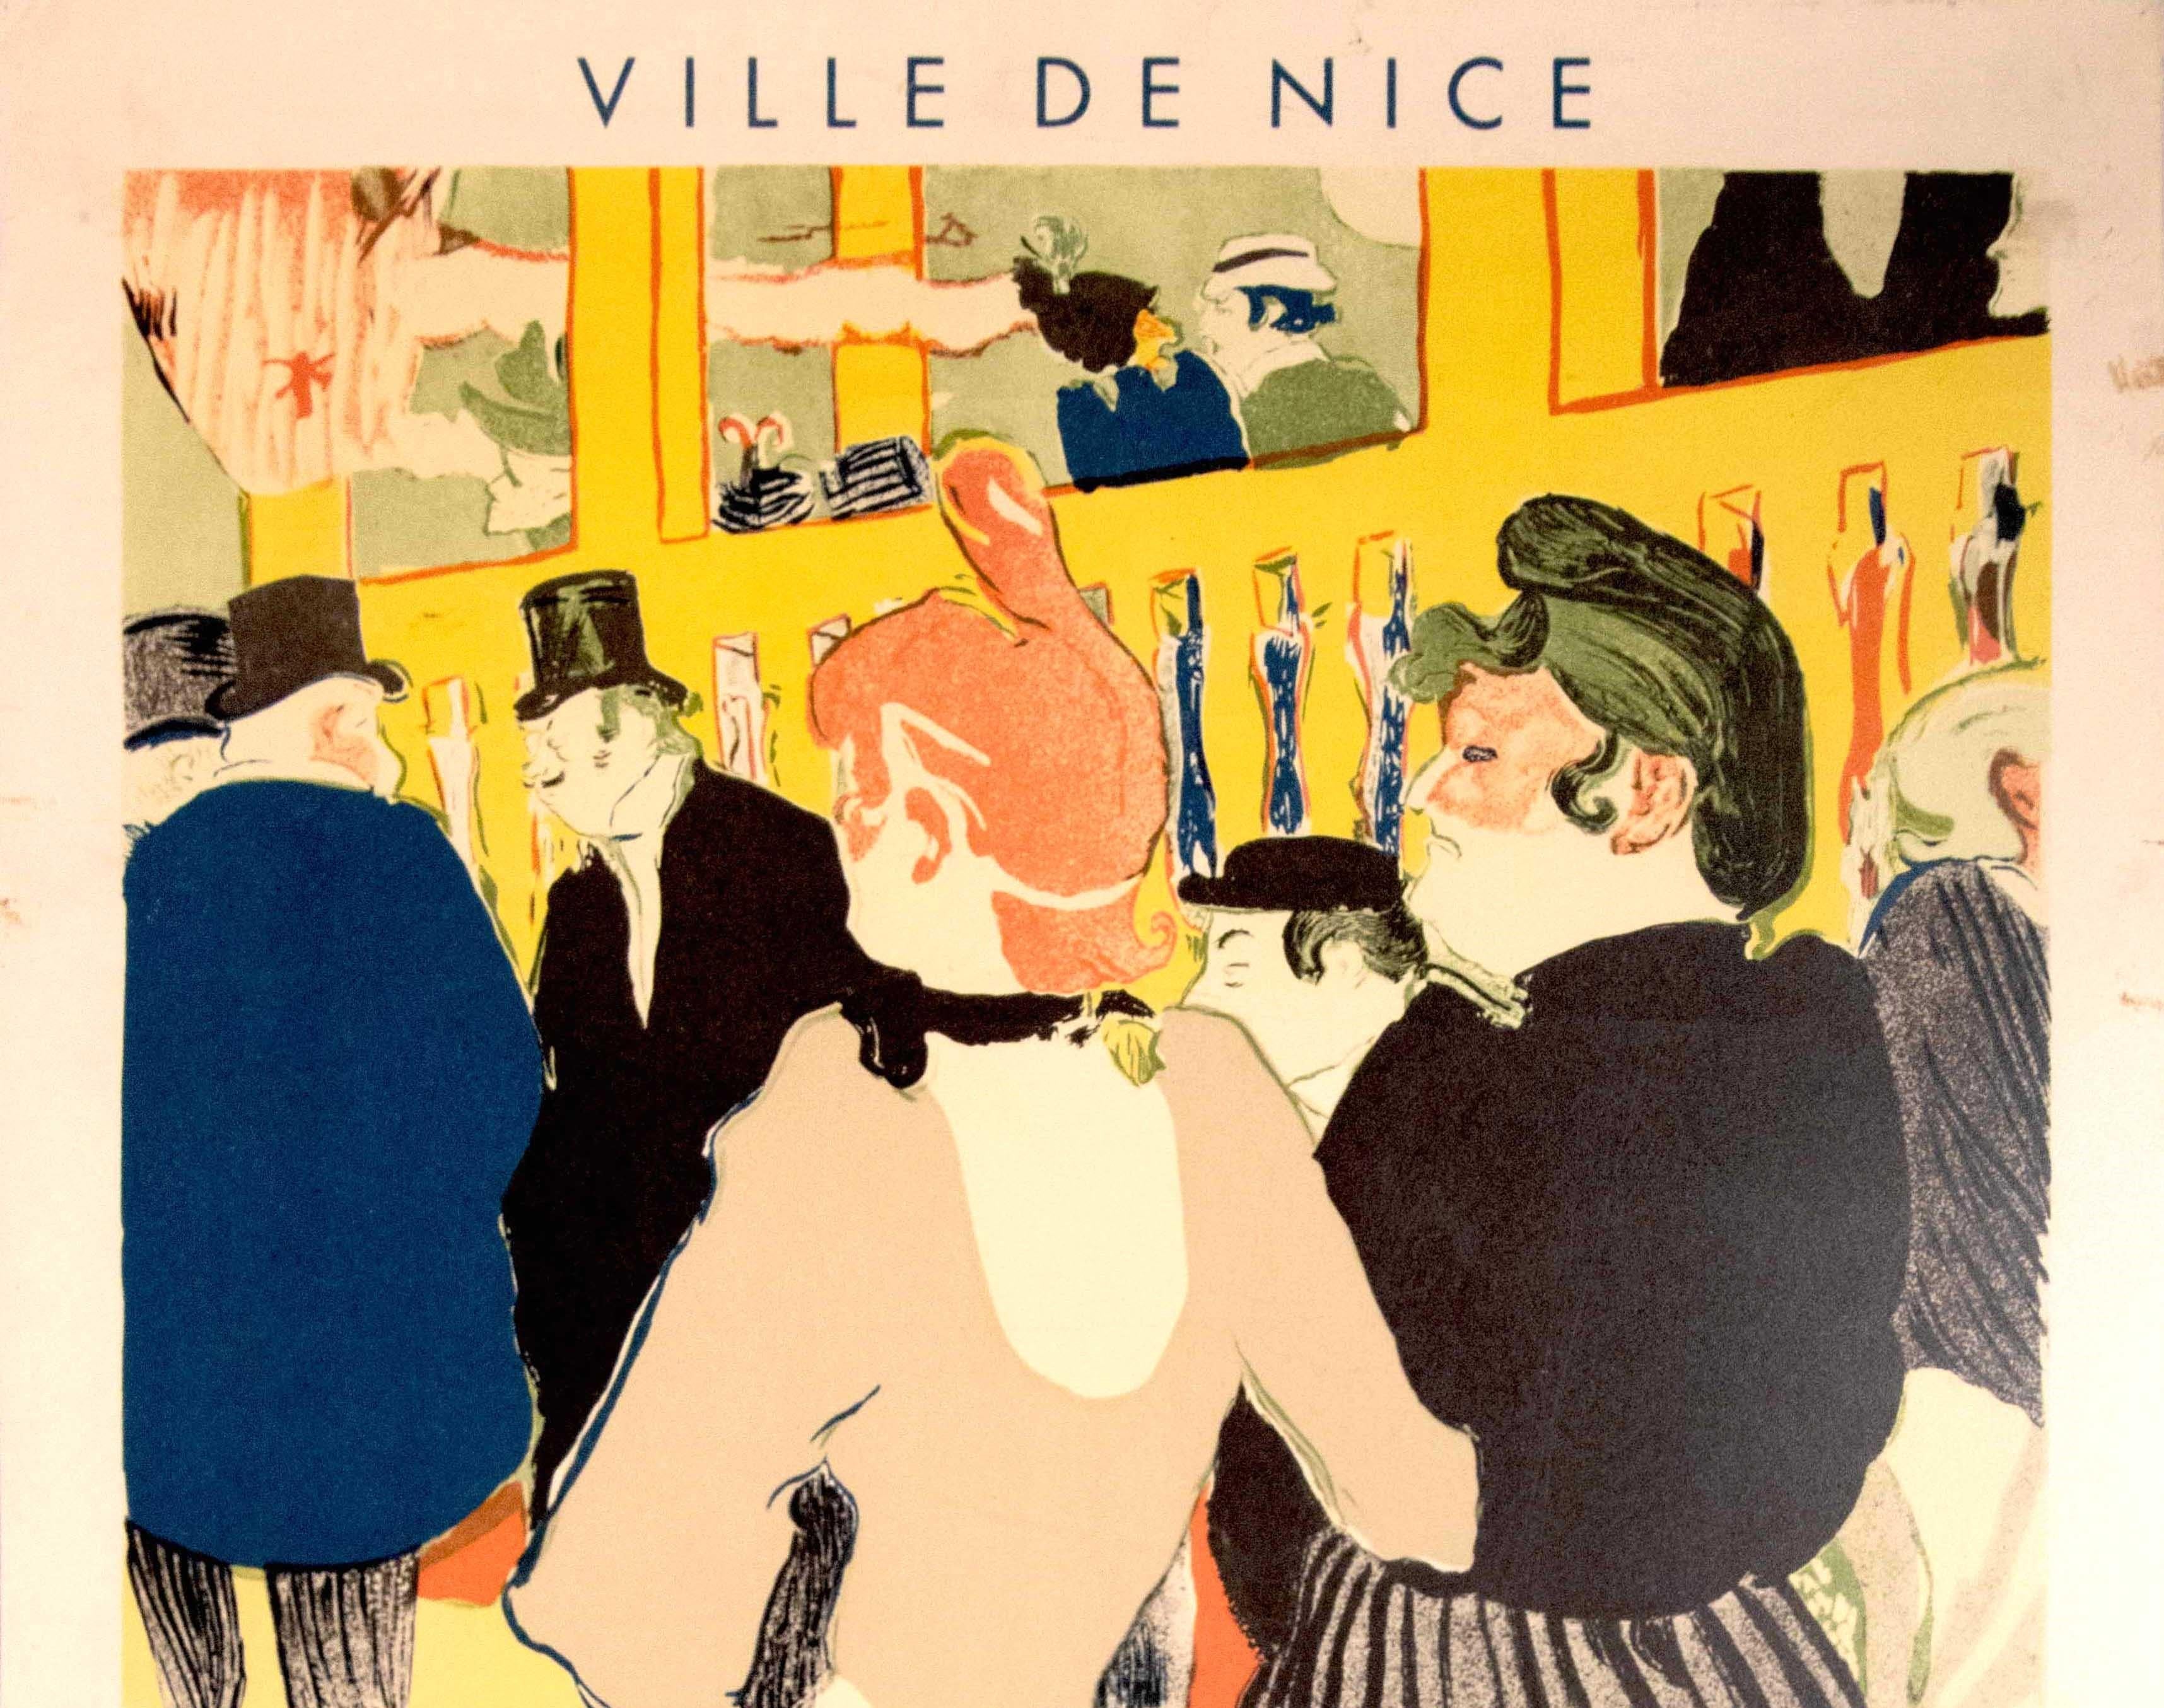 Original vintage advertising poster for an art exhibition of graphic artwork by the notable artist Henri de Toulouse-Lautrec (1865-1901) at Galerie Des Ponchettes Ville de Nice from 30 January to 15 March 1954, featuring a painting by Toulouse